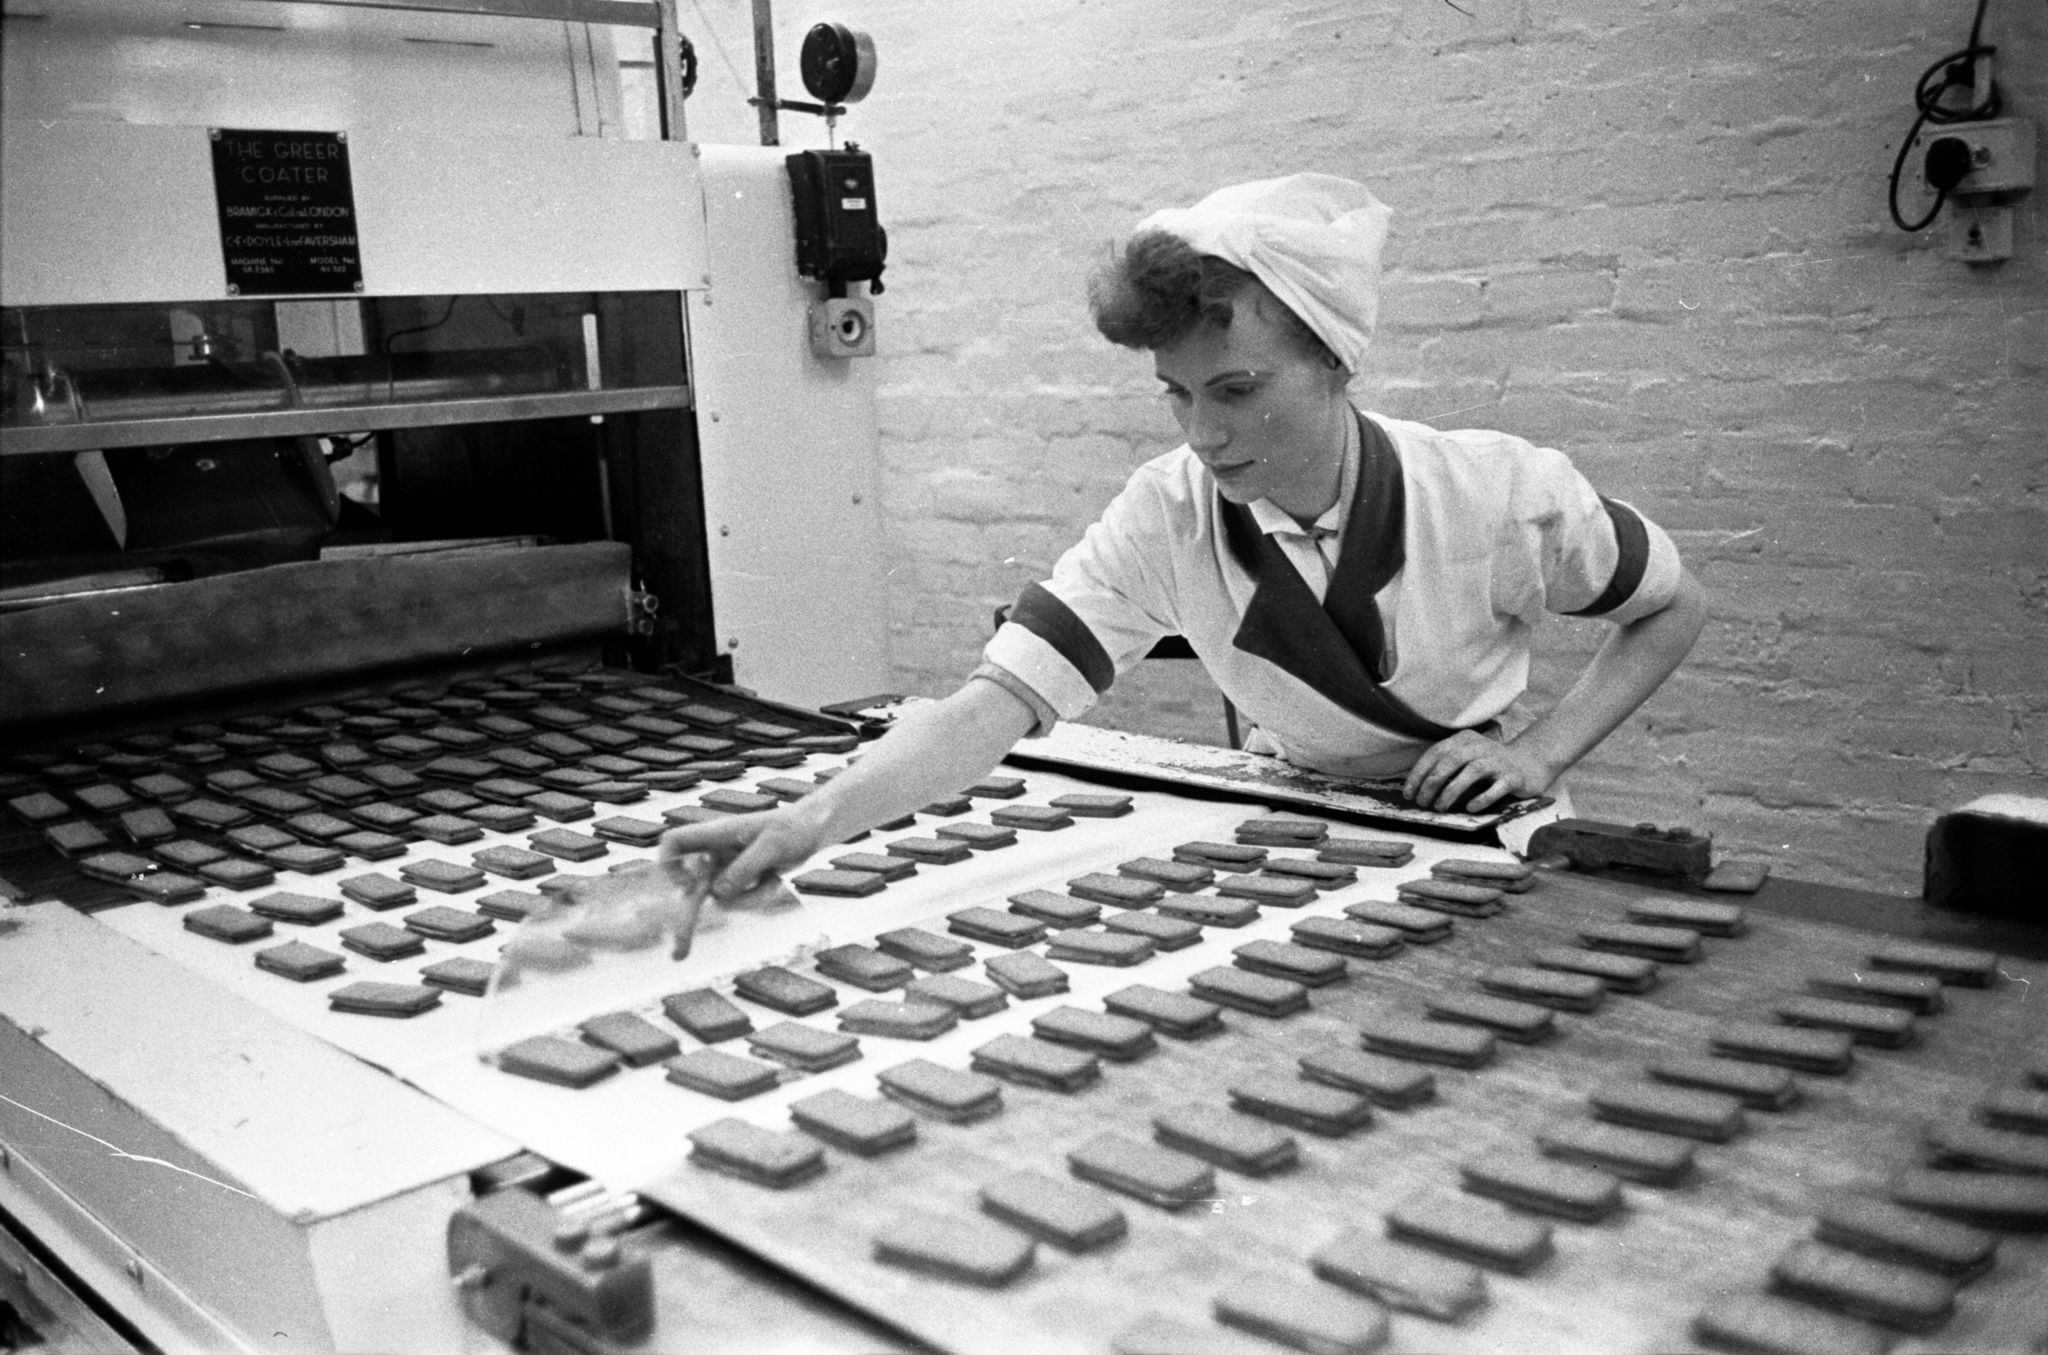 20th August 1955: A worker checking the quality of biscuits on a conveyor belt in the Glengarry Bakery of William Macdonald and Sons, Glasgow. This company's 24-hour production line generates a constant stream of biscuits and produces a quarter of Britain's total chocolate biscuit output. Original Publication: Picture Post - 7942 - Let Glasgow Flourish! - pub. 1955 (Photo by Haywood Magee/Picture Post/Hulton Archive/Getty Images)